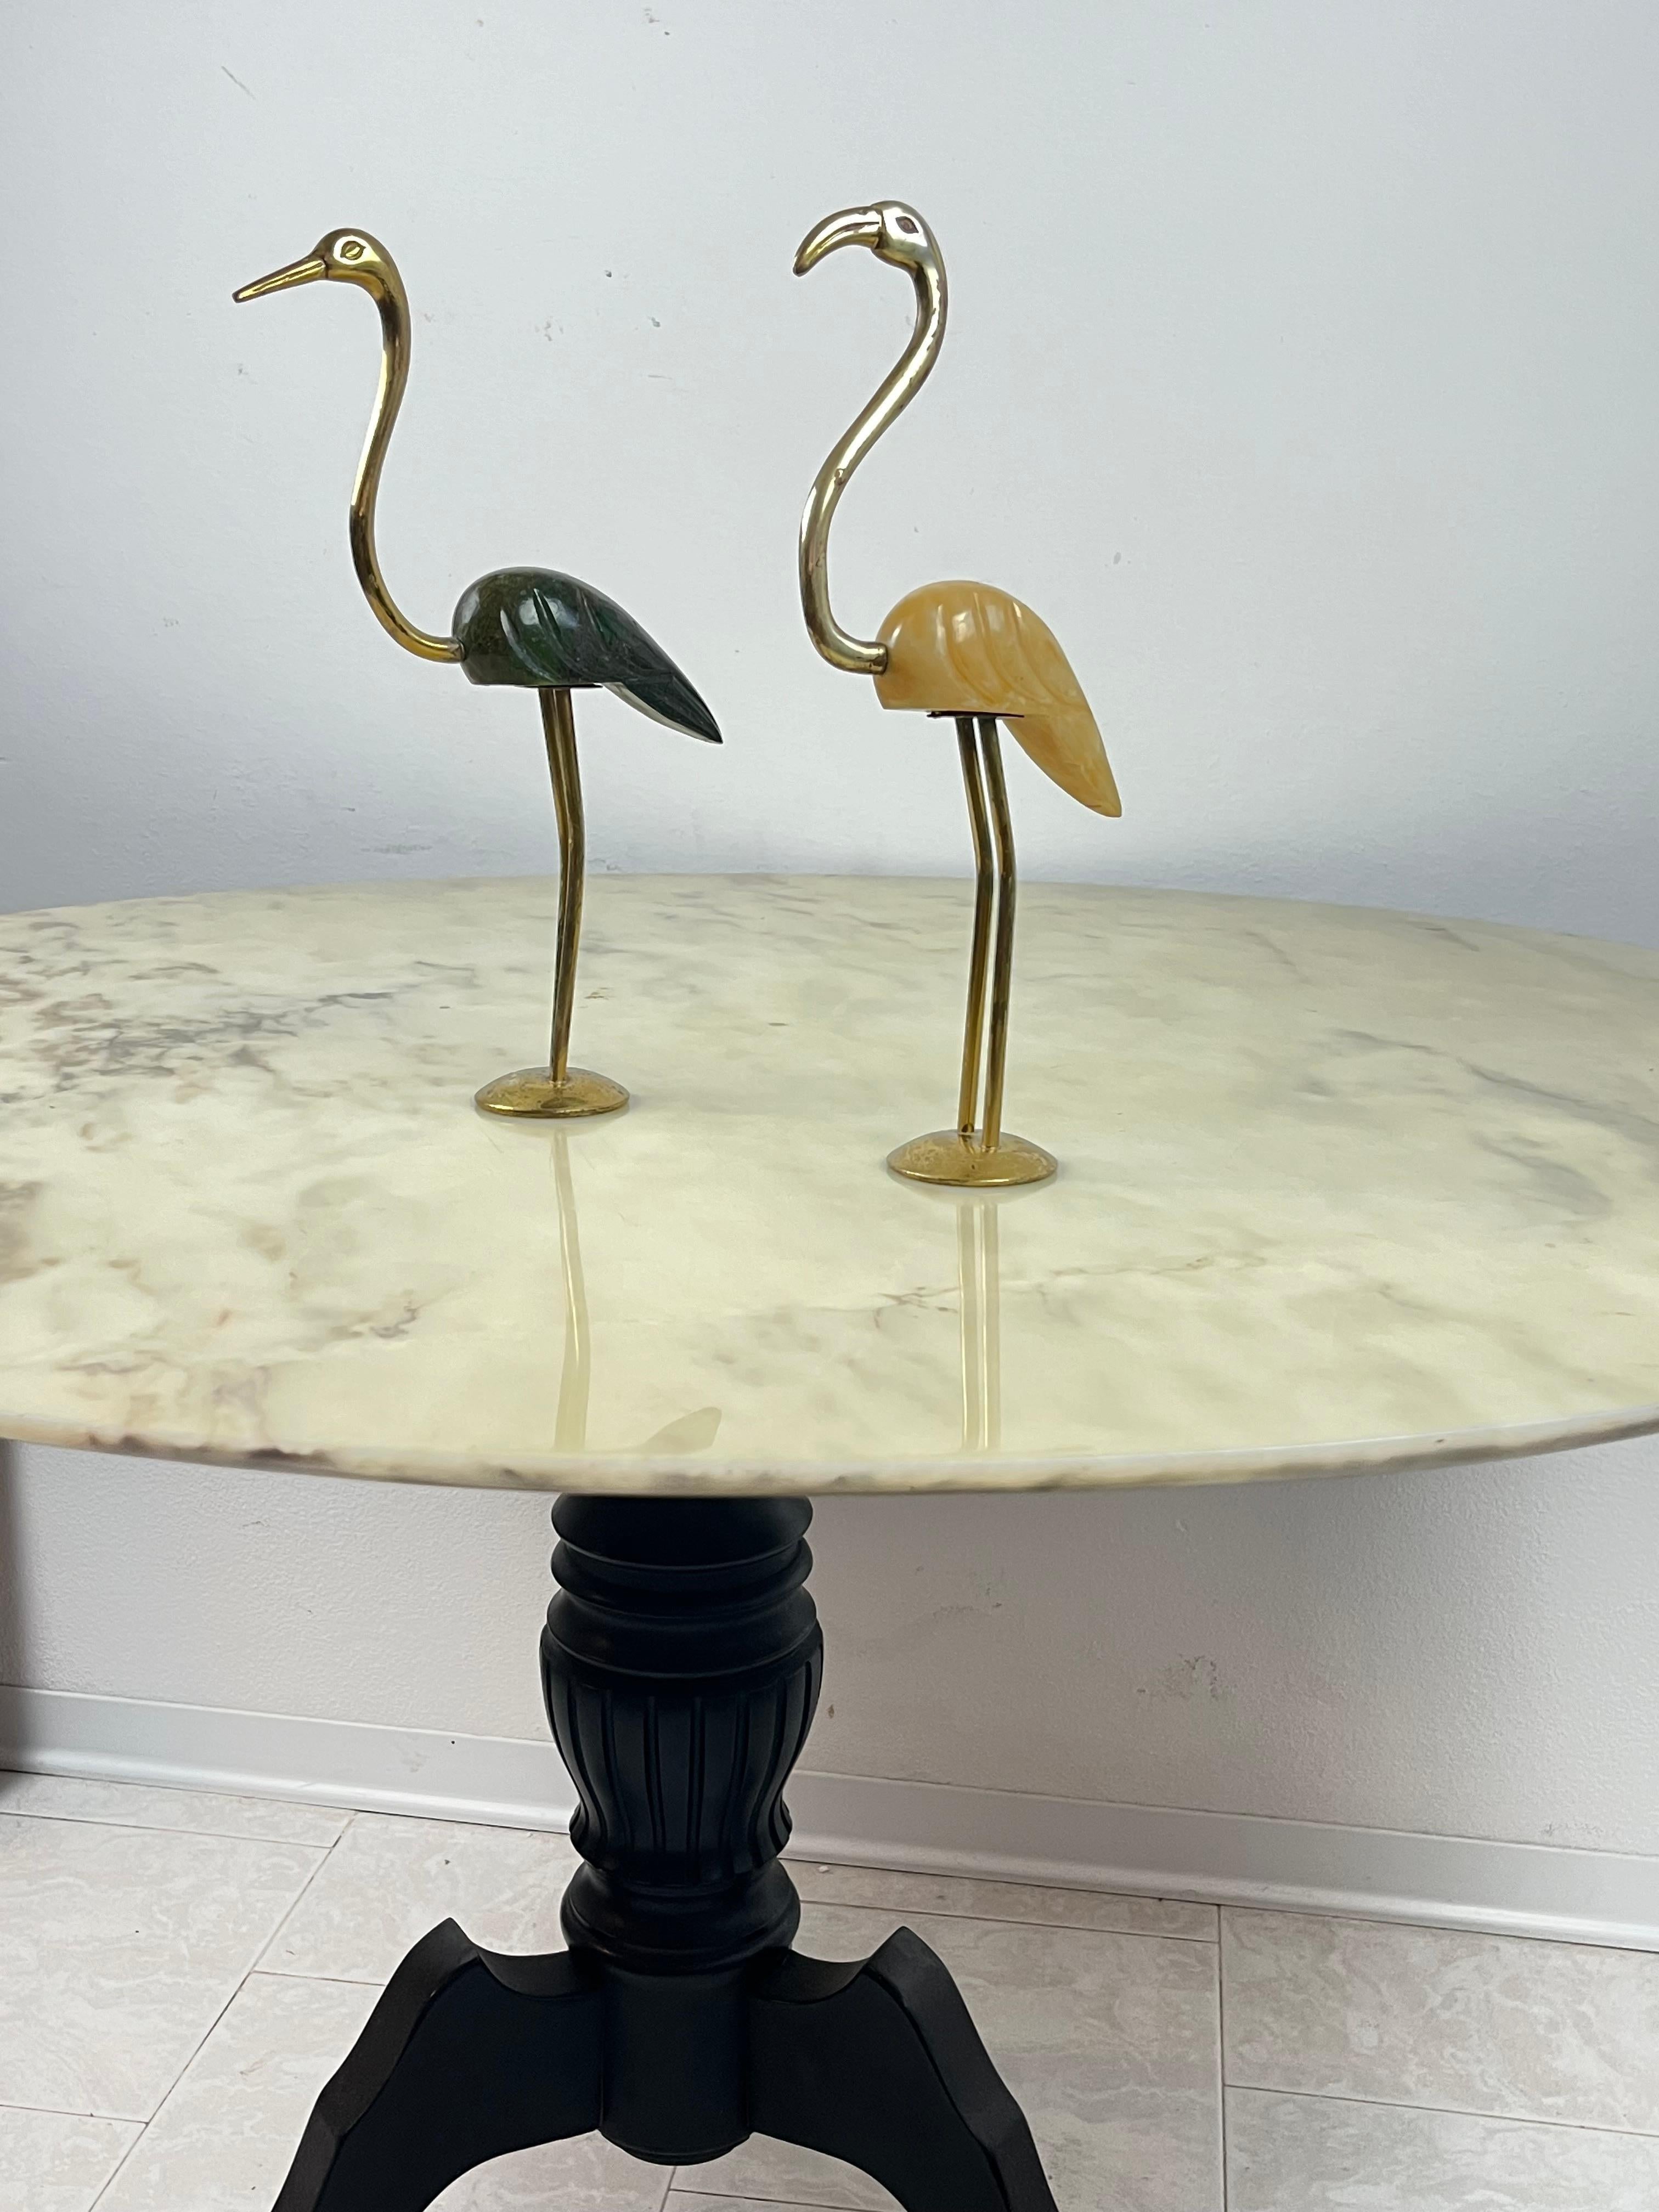 Pair of brass and marble flamingos, Italy, 1950s
Found in a noble apartment. Intact and in good condition, small signs of aging. 33 cm tall.